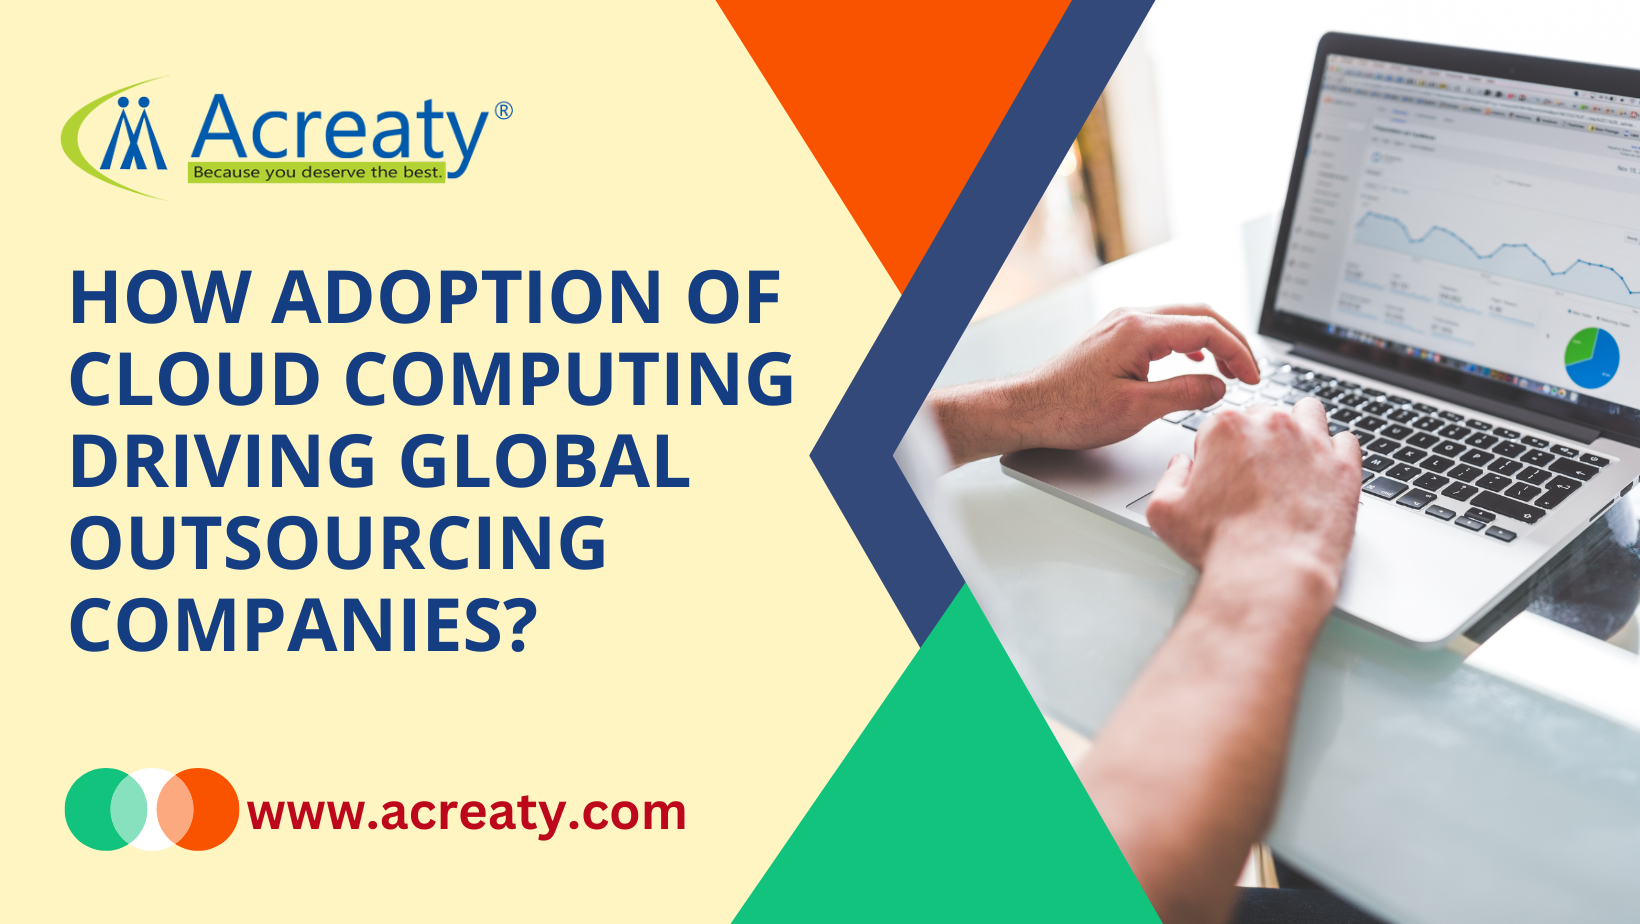 How adoption of Cloud Computing driving Global Outsourcing Companies?